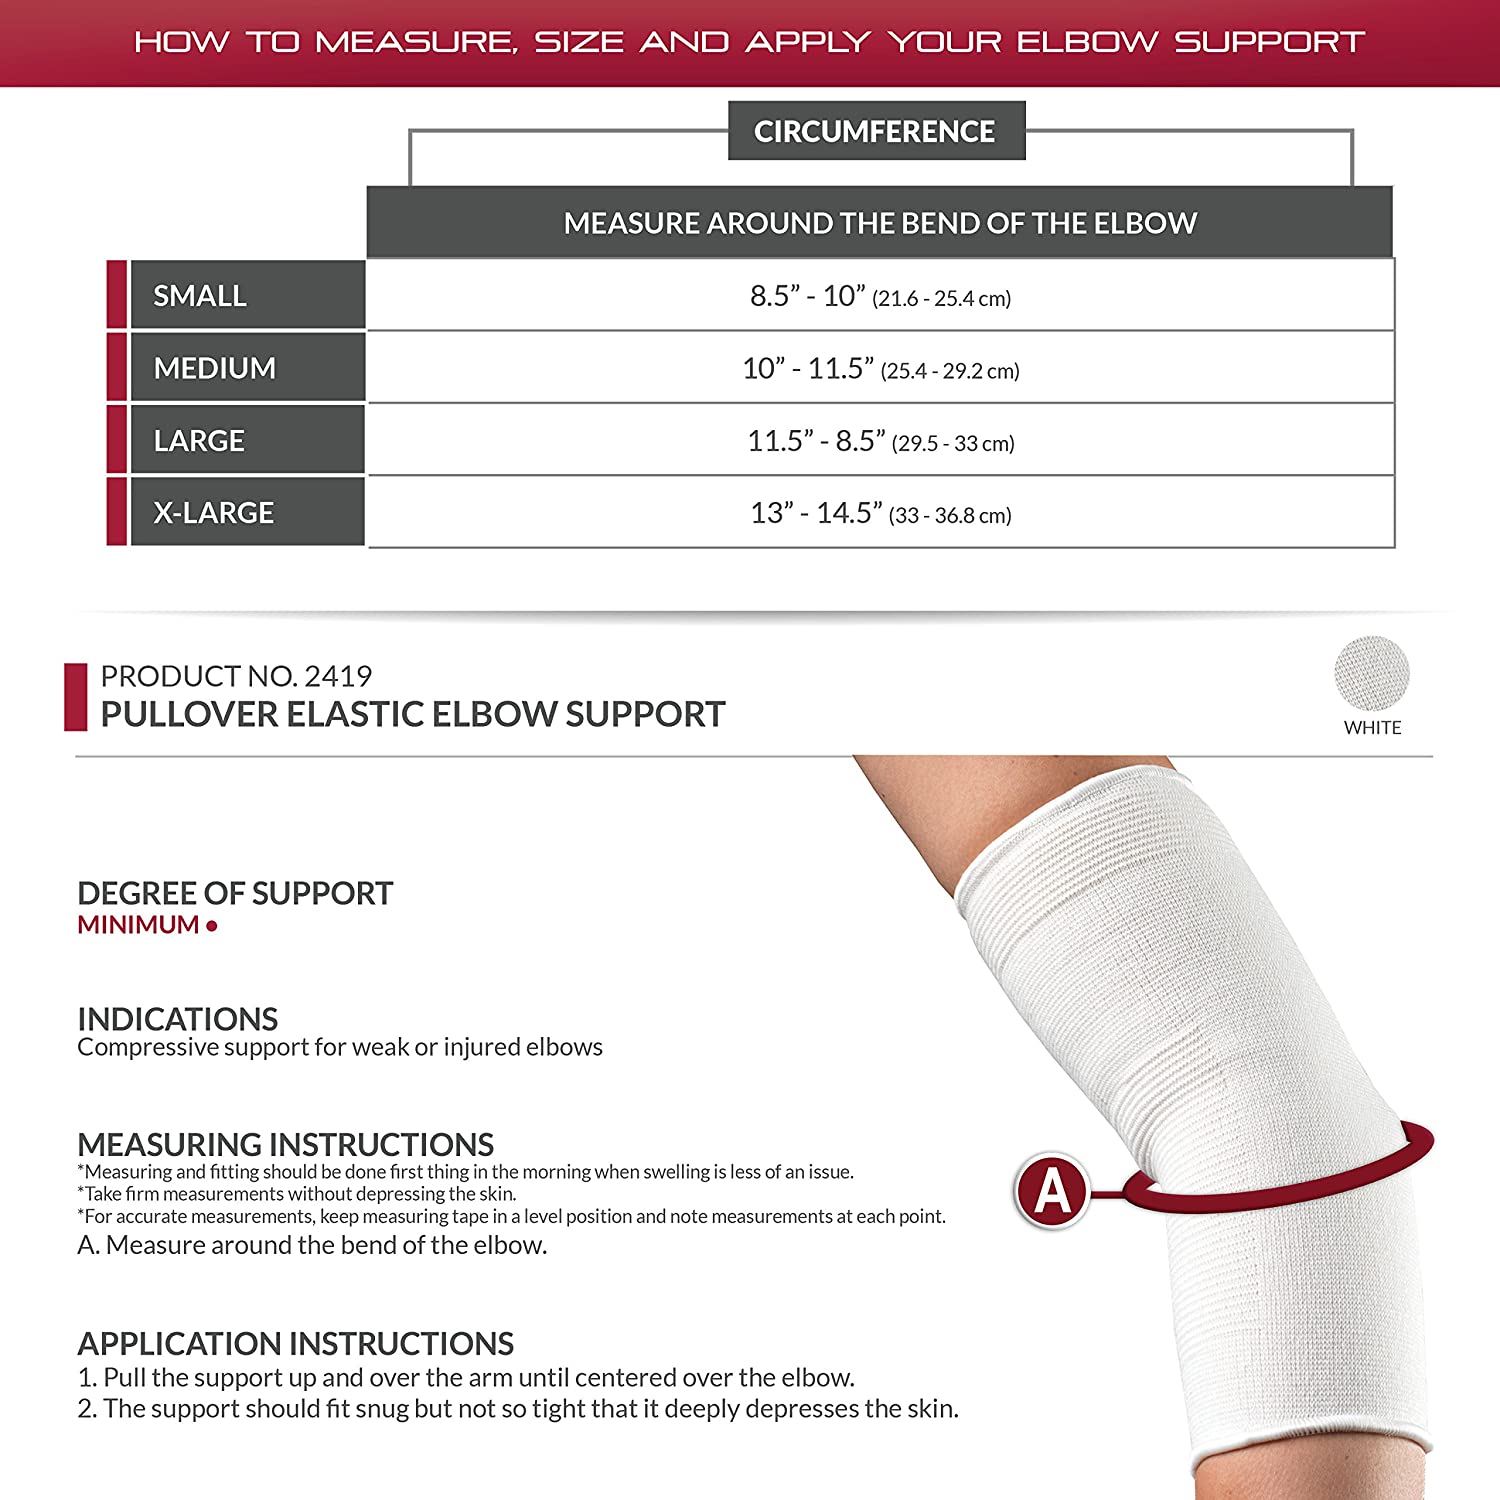 SAI ELBOW SUPPORT PULLOVER